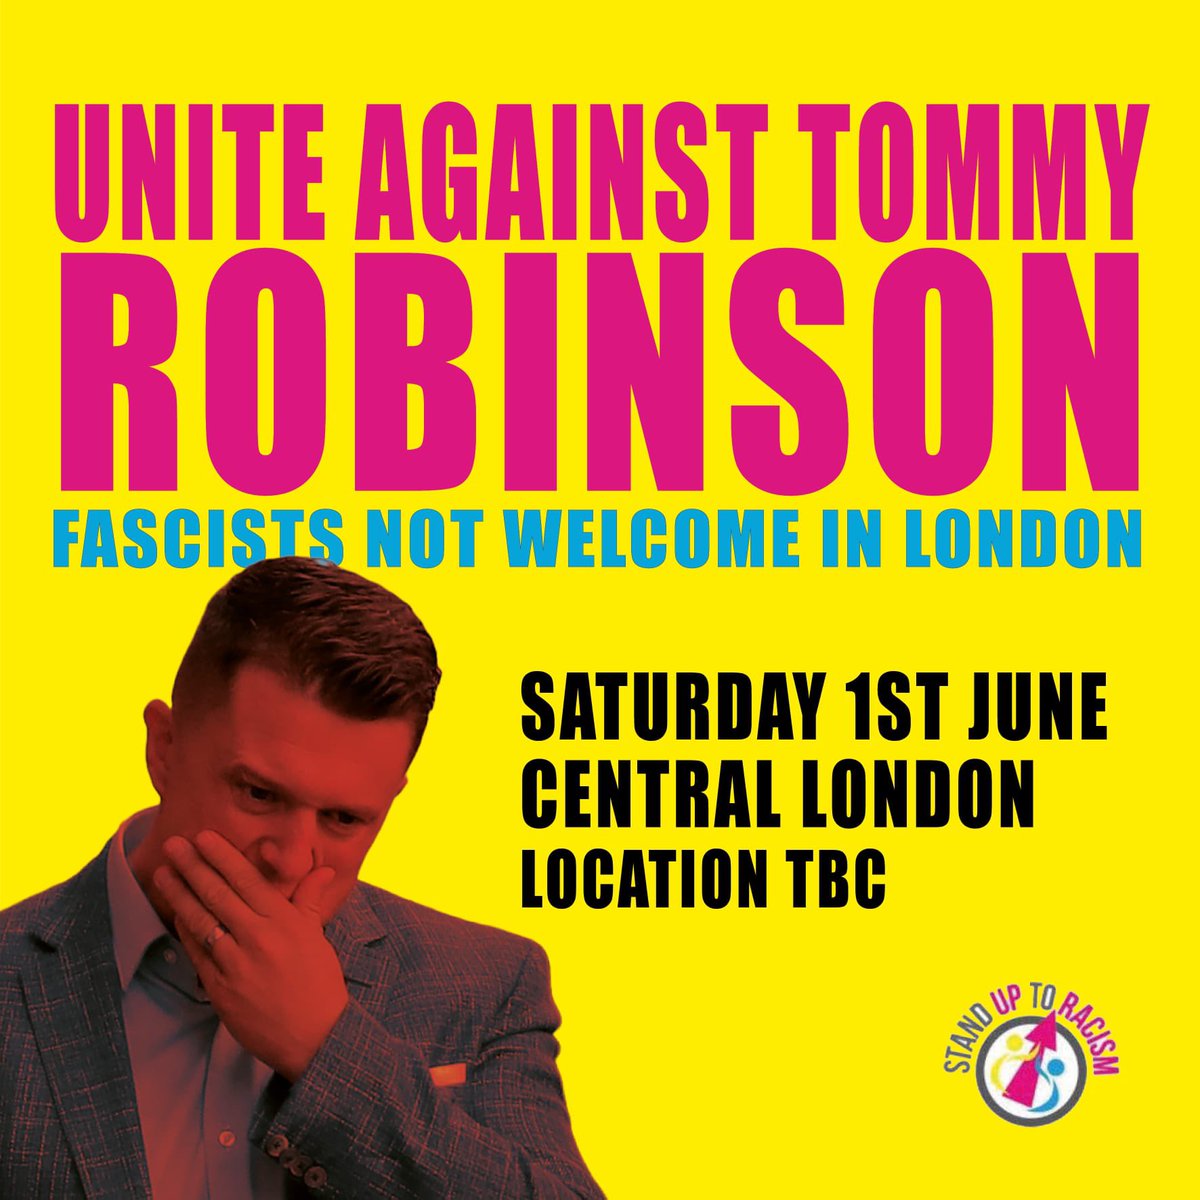 SAVE THE DATE Fascist Tommy Robinson has said he is marching in London on Saturday 1 June. Robinson is a Nazi who has a history of fascist organisation and mobilisation. He’s not welcome in London - or anywhere else. Join our counter protest ✊🏾